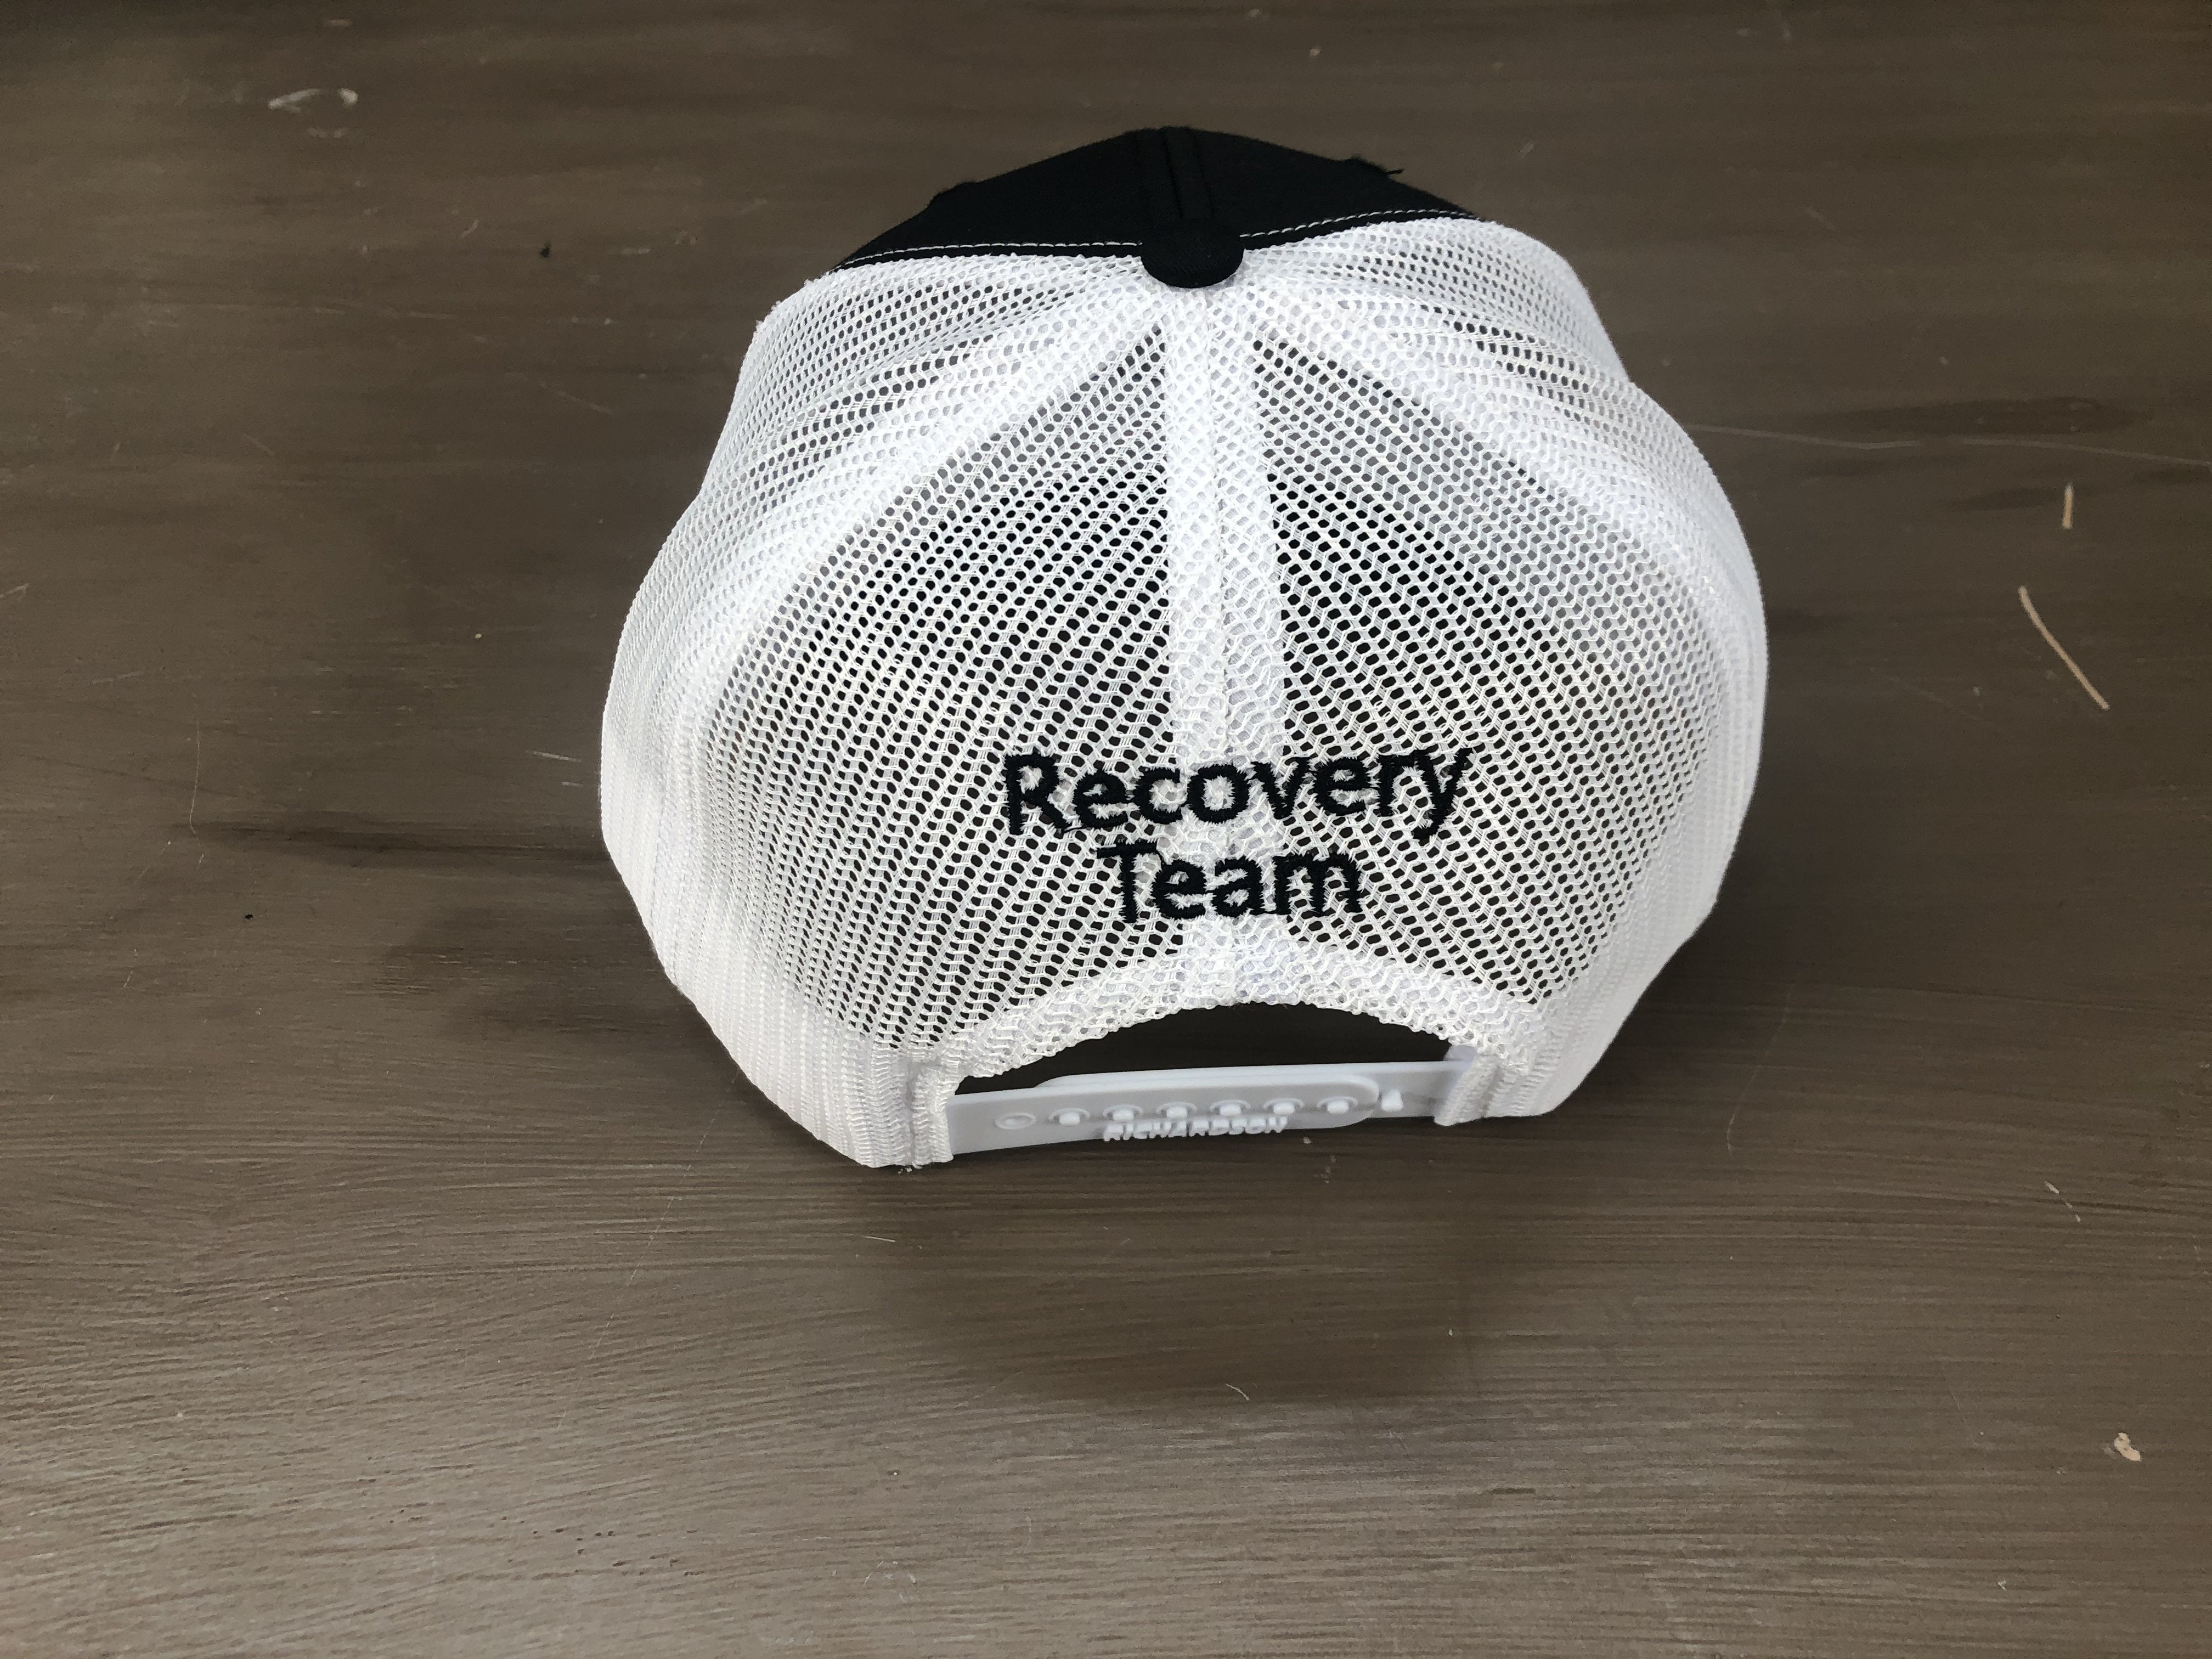 High Plains Prospectors - Recovery Team Metal Detecting Hat Black & White